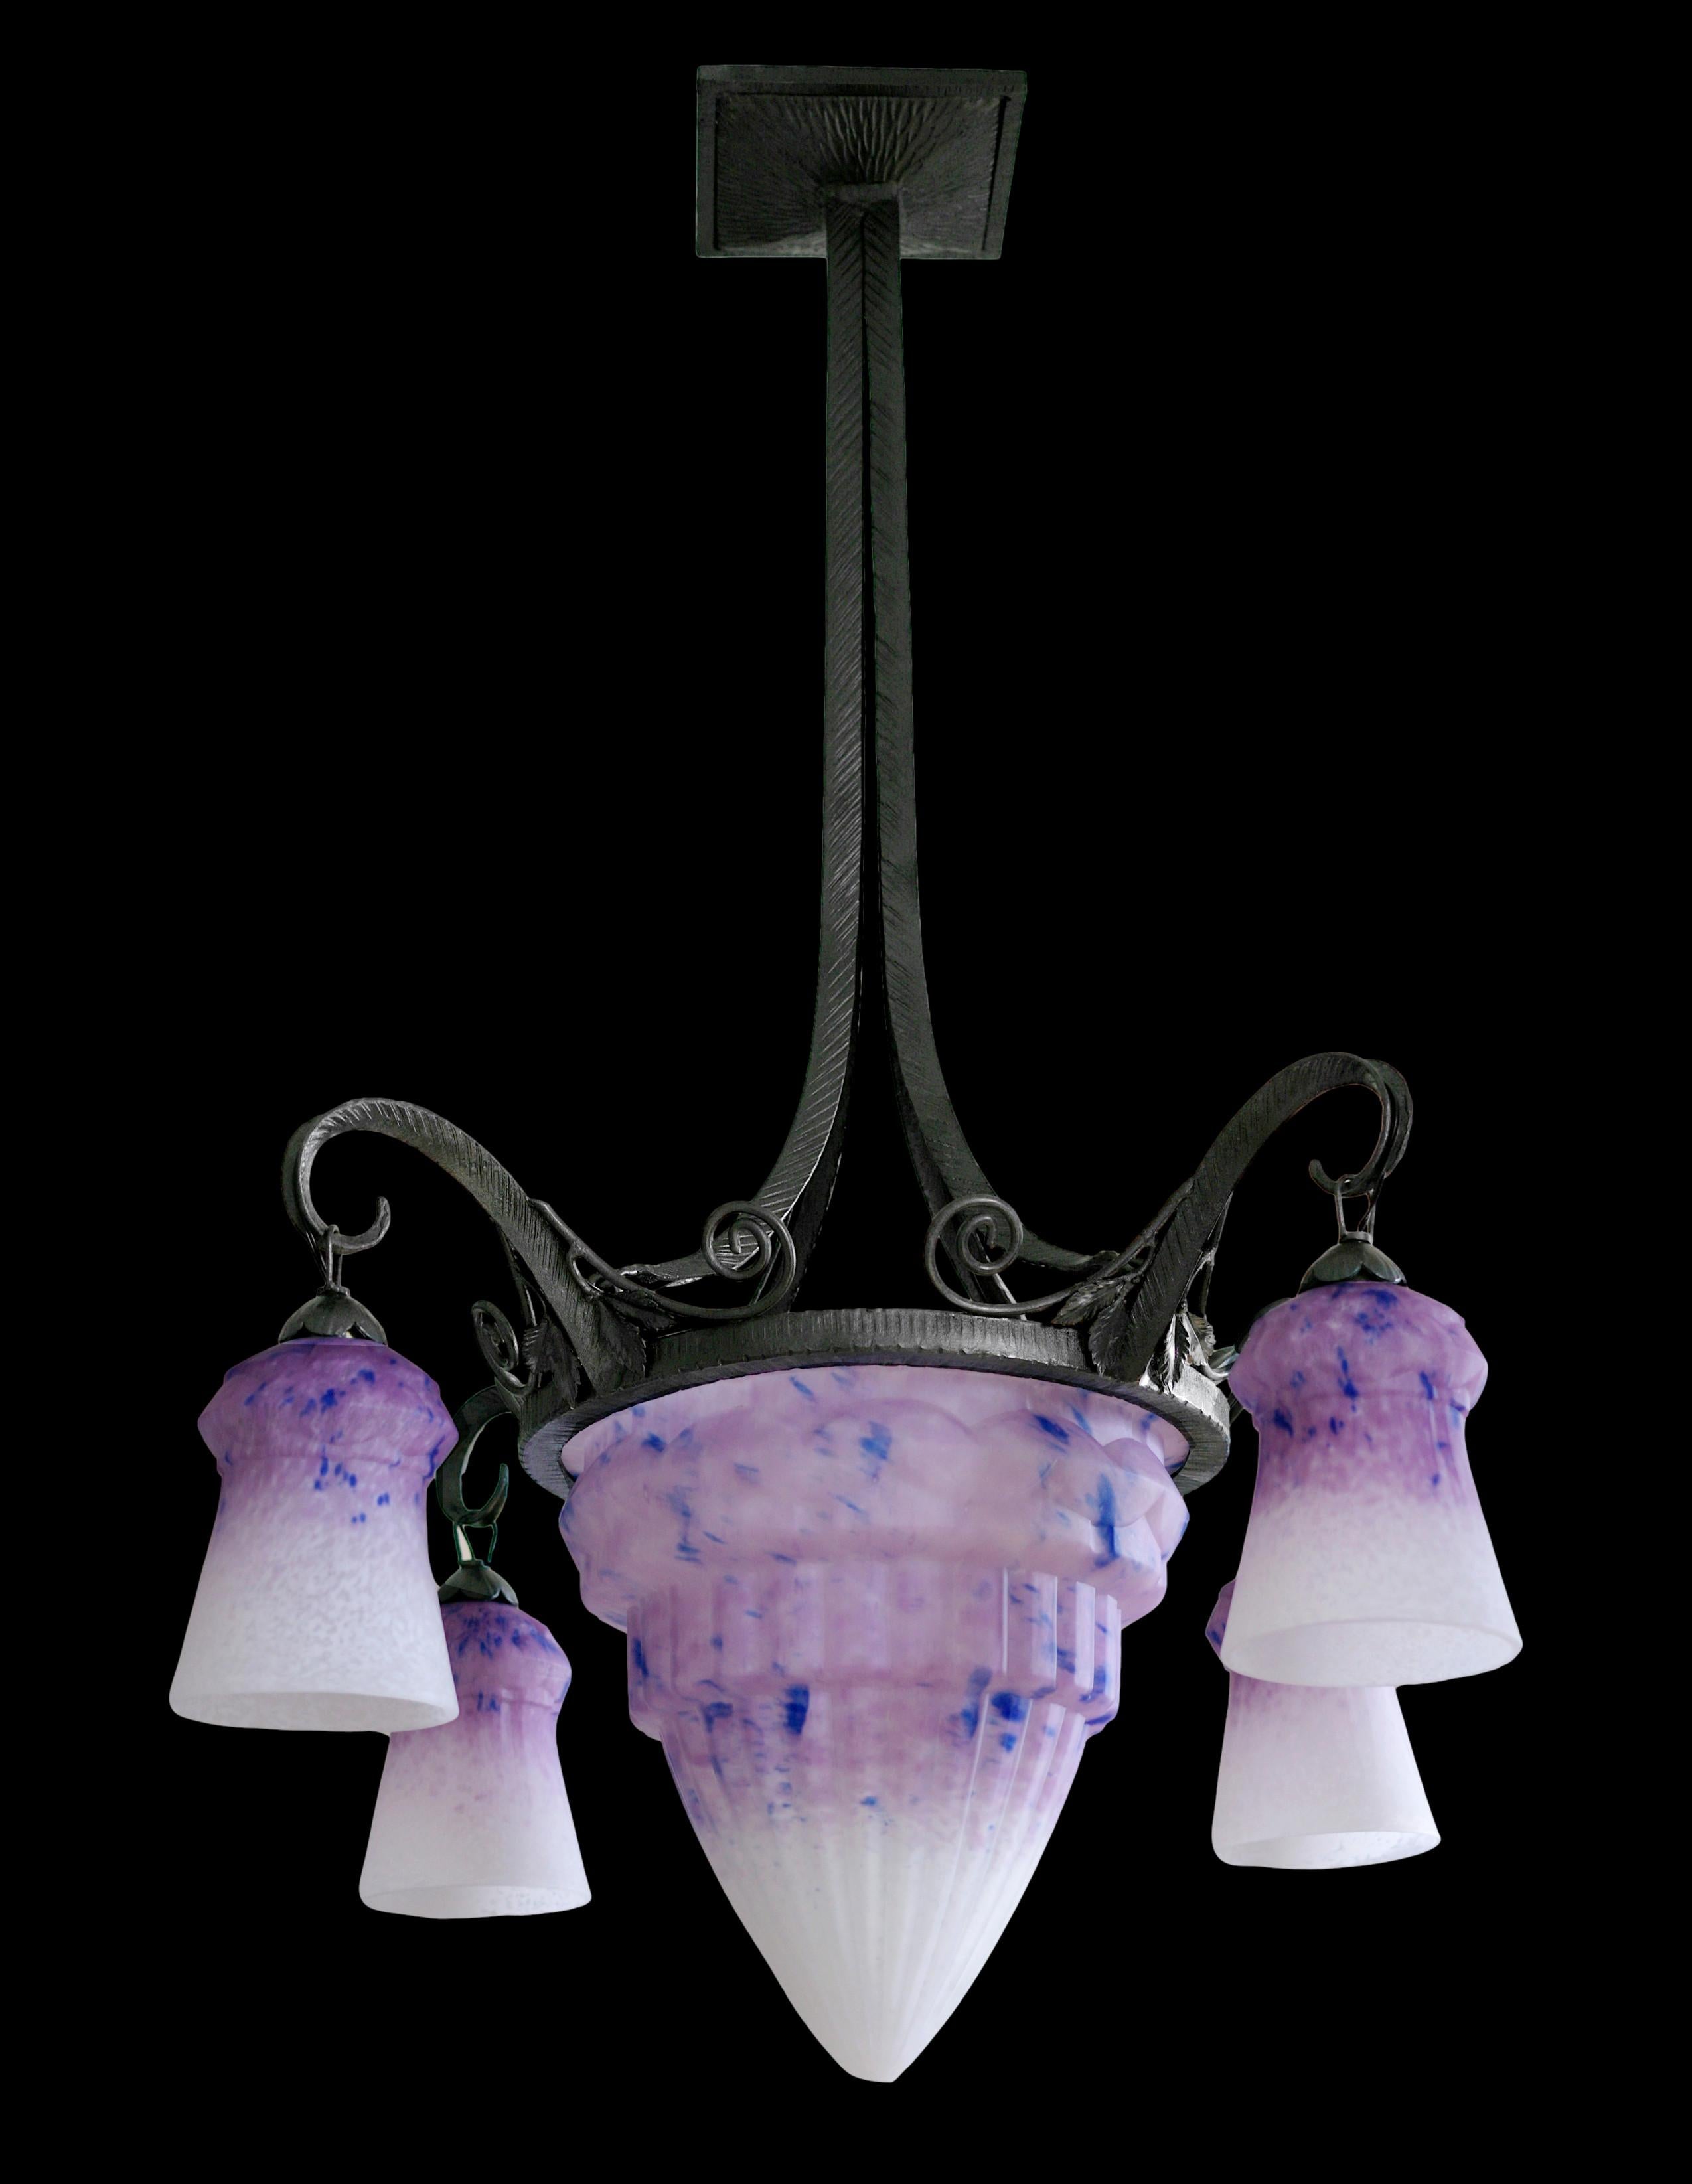 French Art Deco chandelier by Charles Schneider, Epinay-sur-Seine (Paris), ca.1928. 1+4 large blown in the mold glass shades, powders are applied between two layers, that come hung at their refined wrought-iron fixture. Height : 36.2